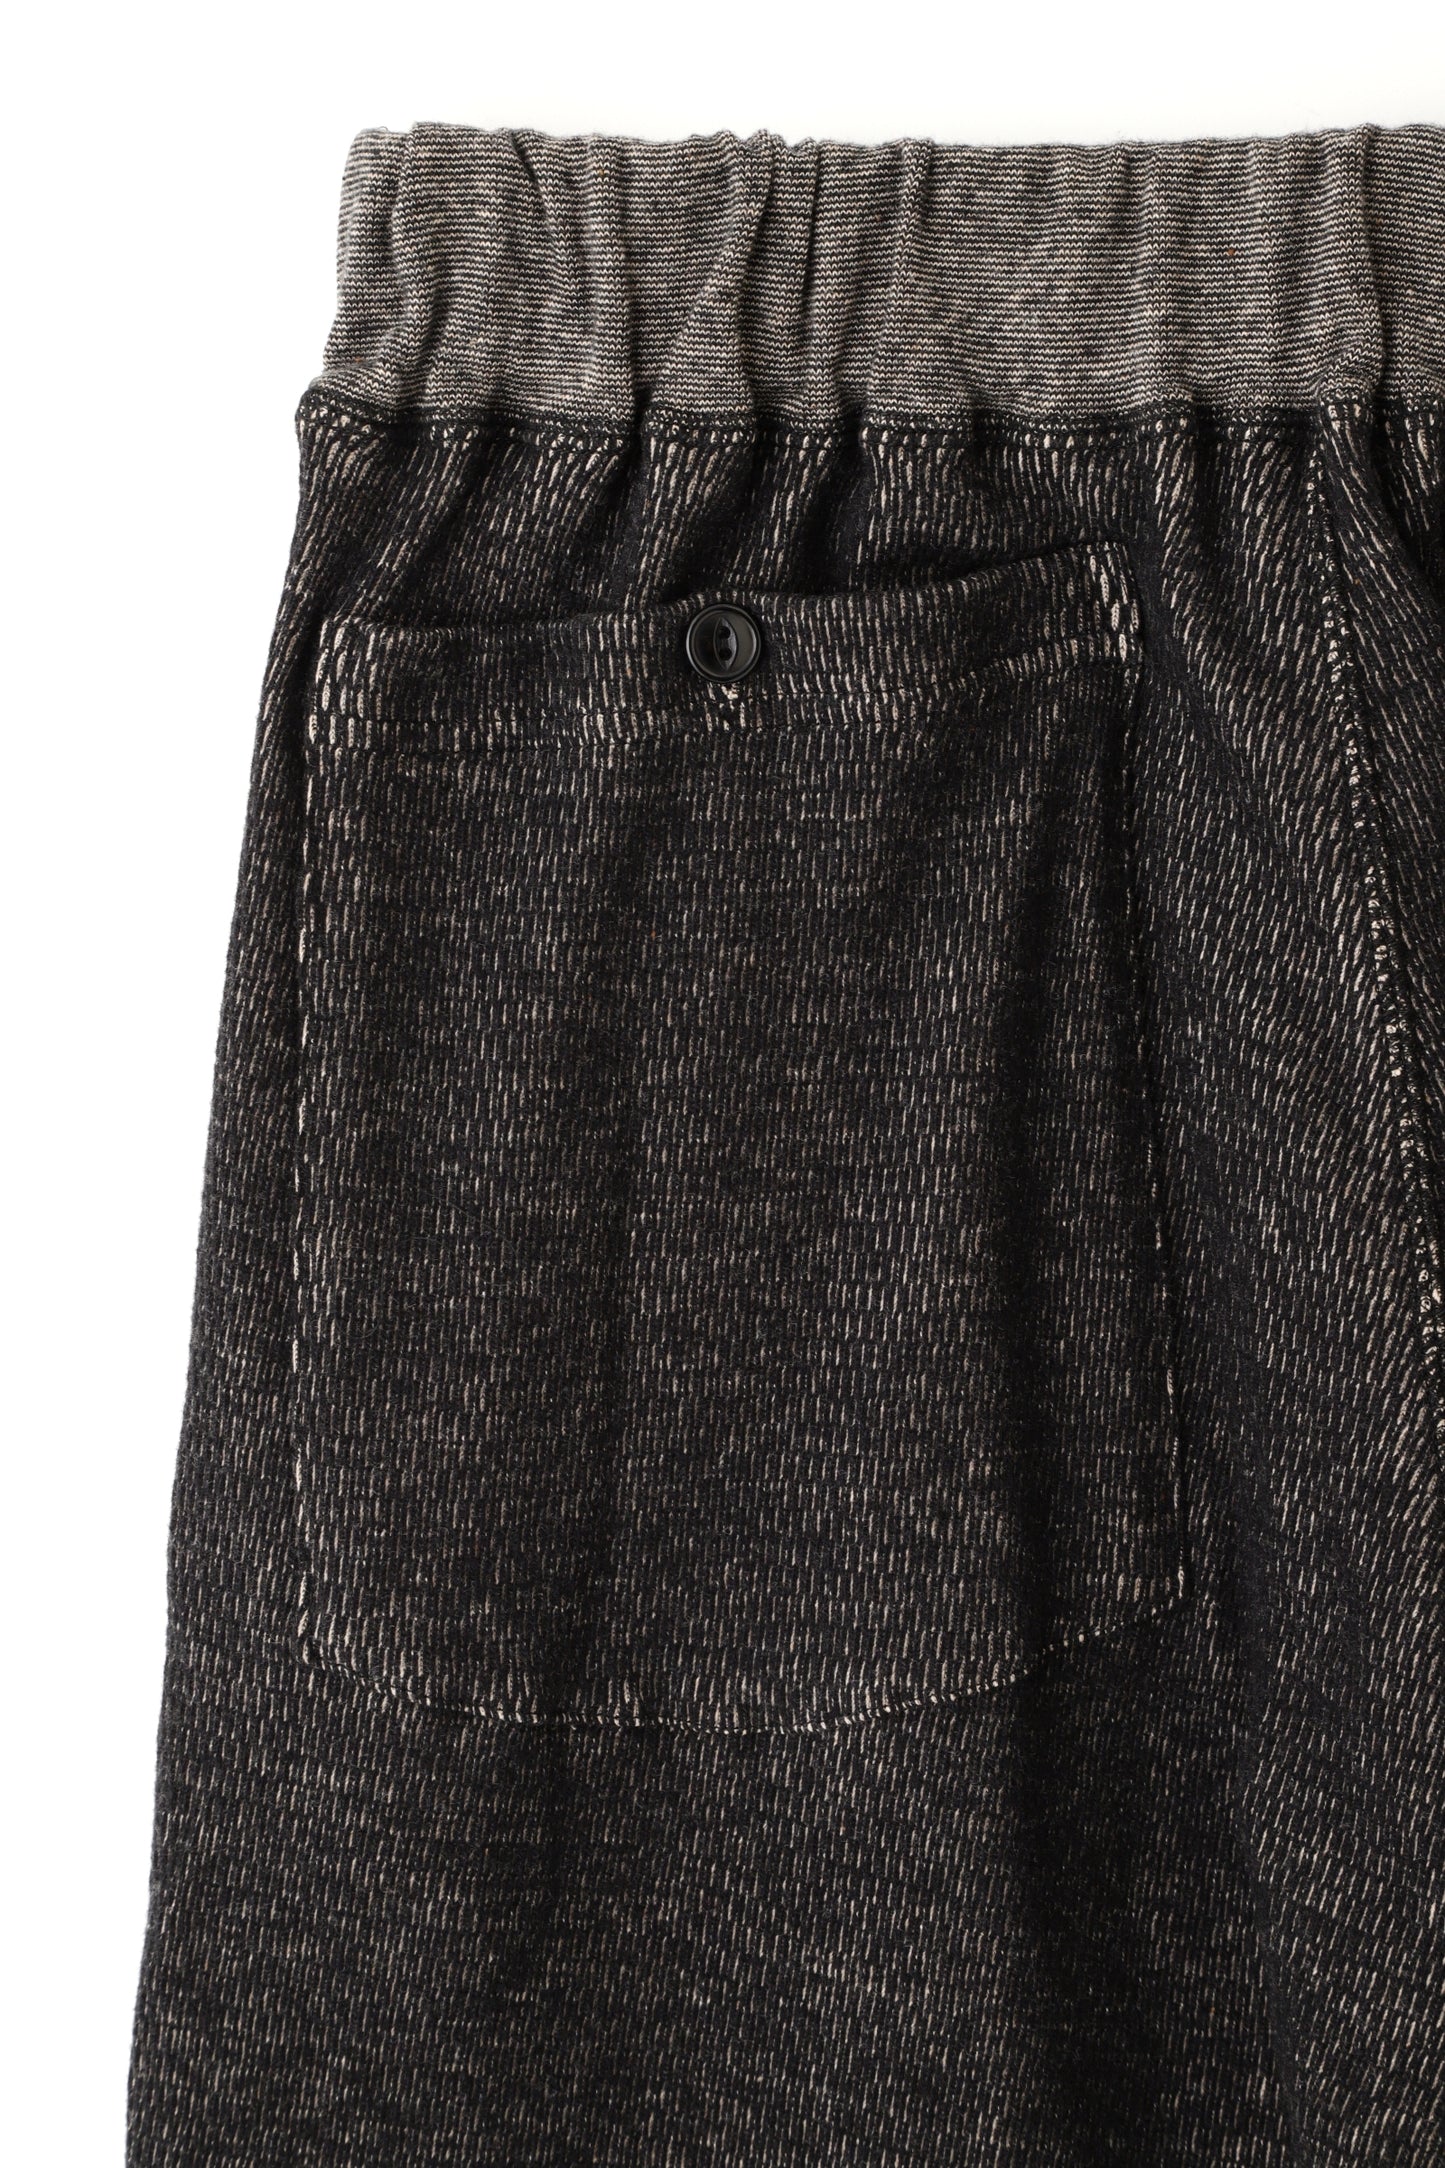 ORGANIC COTTON THERMAL PANTS - Mixed ”UNSTAINED” yarn